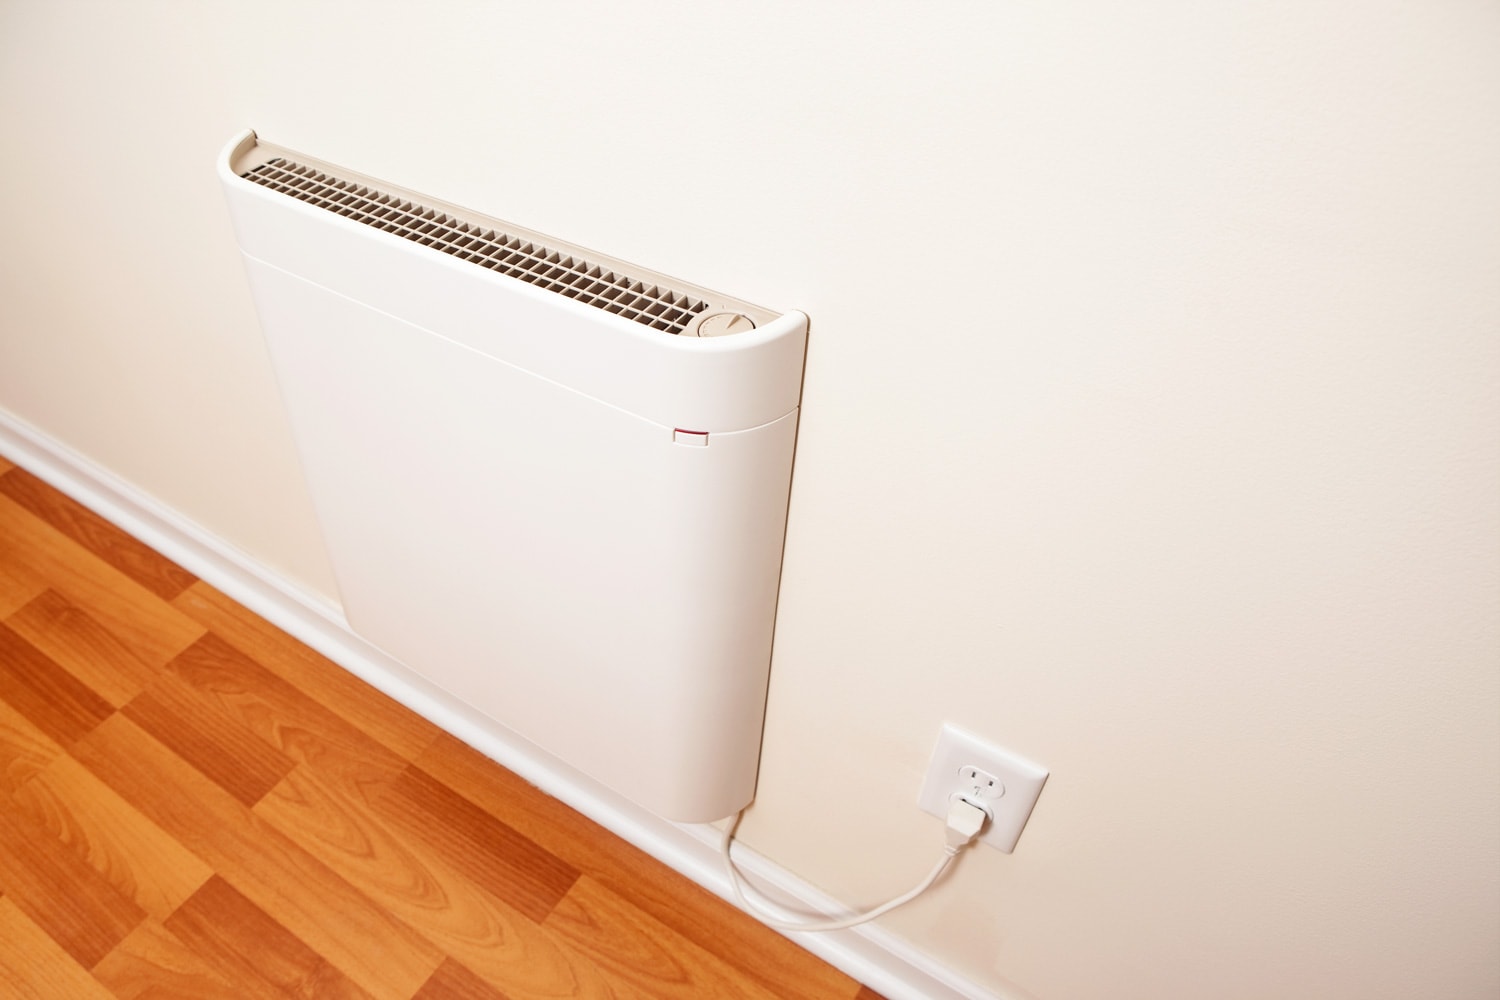 A wall-mounted electric convection heater in a house room. This particular installation acts as supplemental heat when temperatures get very cold outside